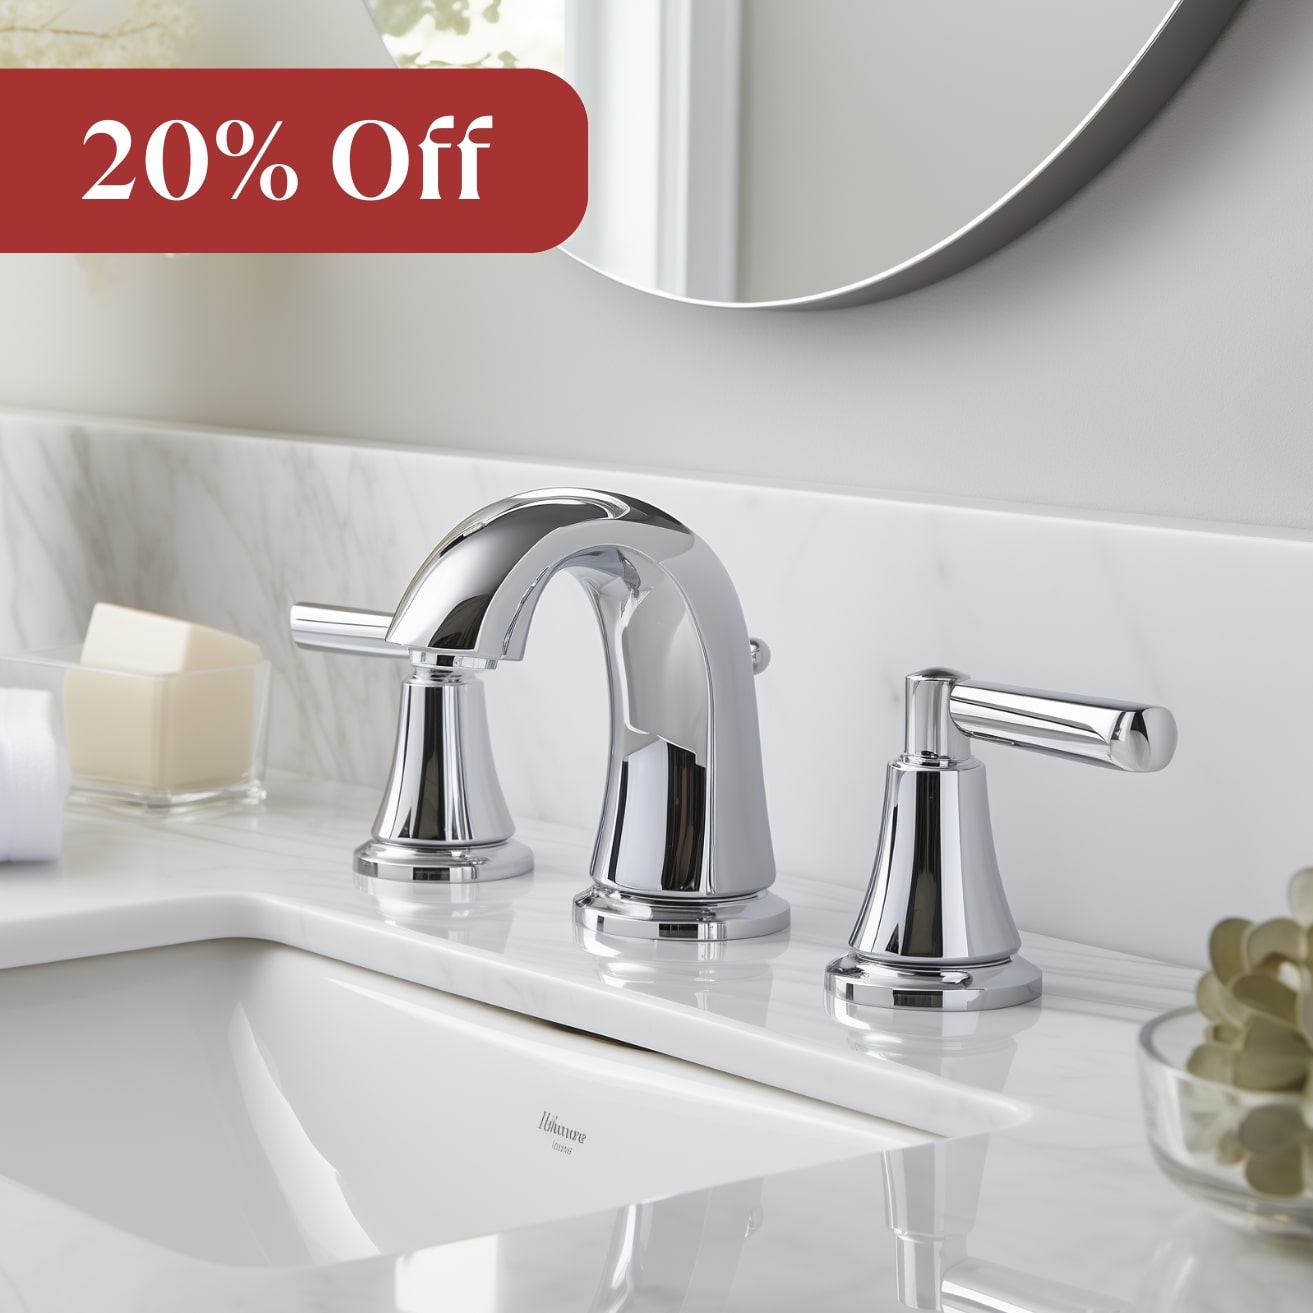 20% Off Wide Faucets